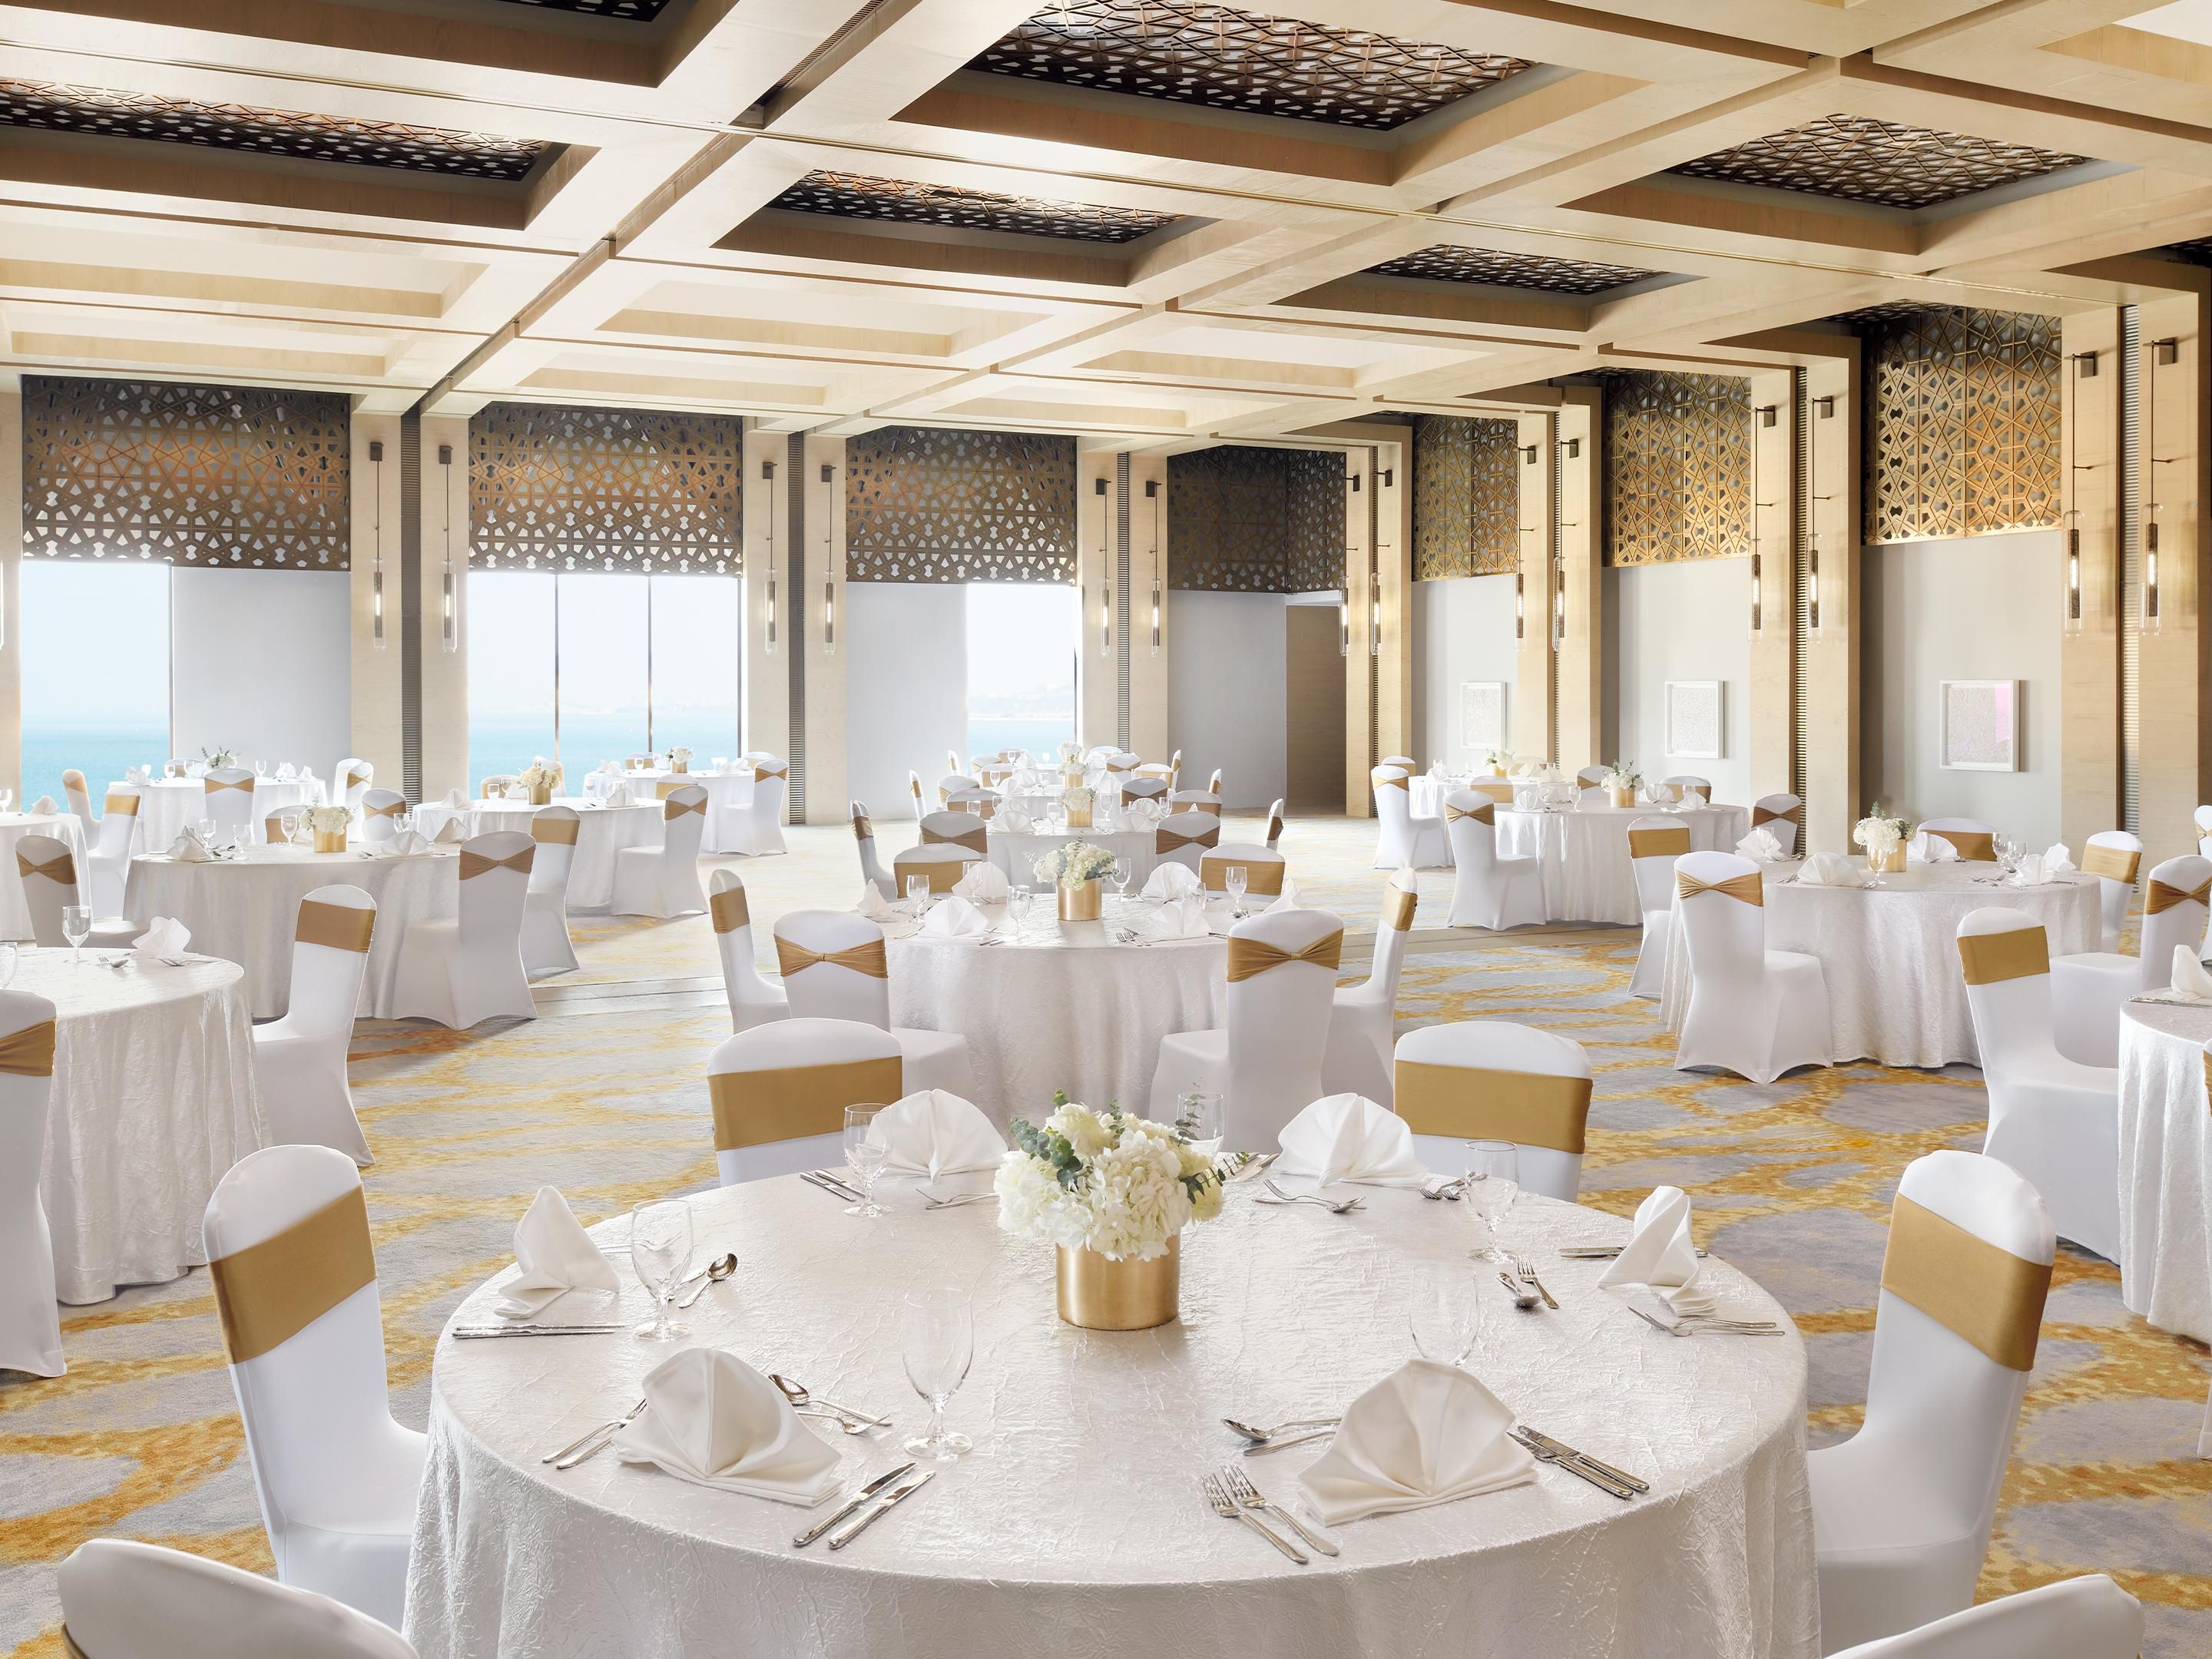 Juman Ballroom is perfect for large-scale events up to 375 guests